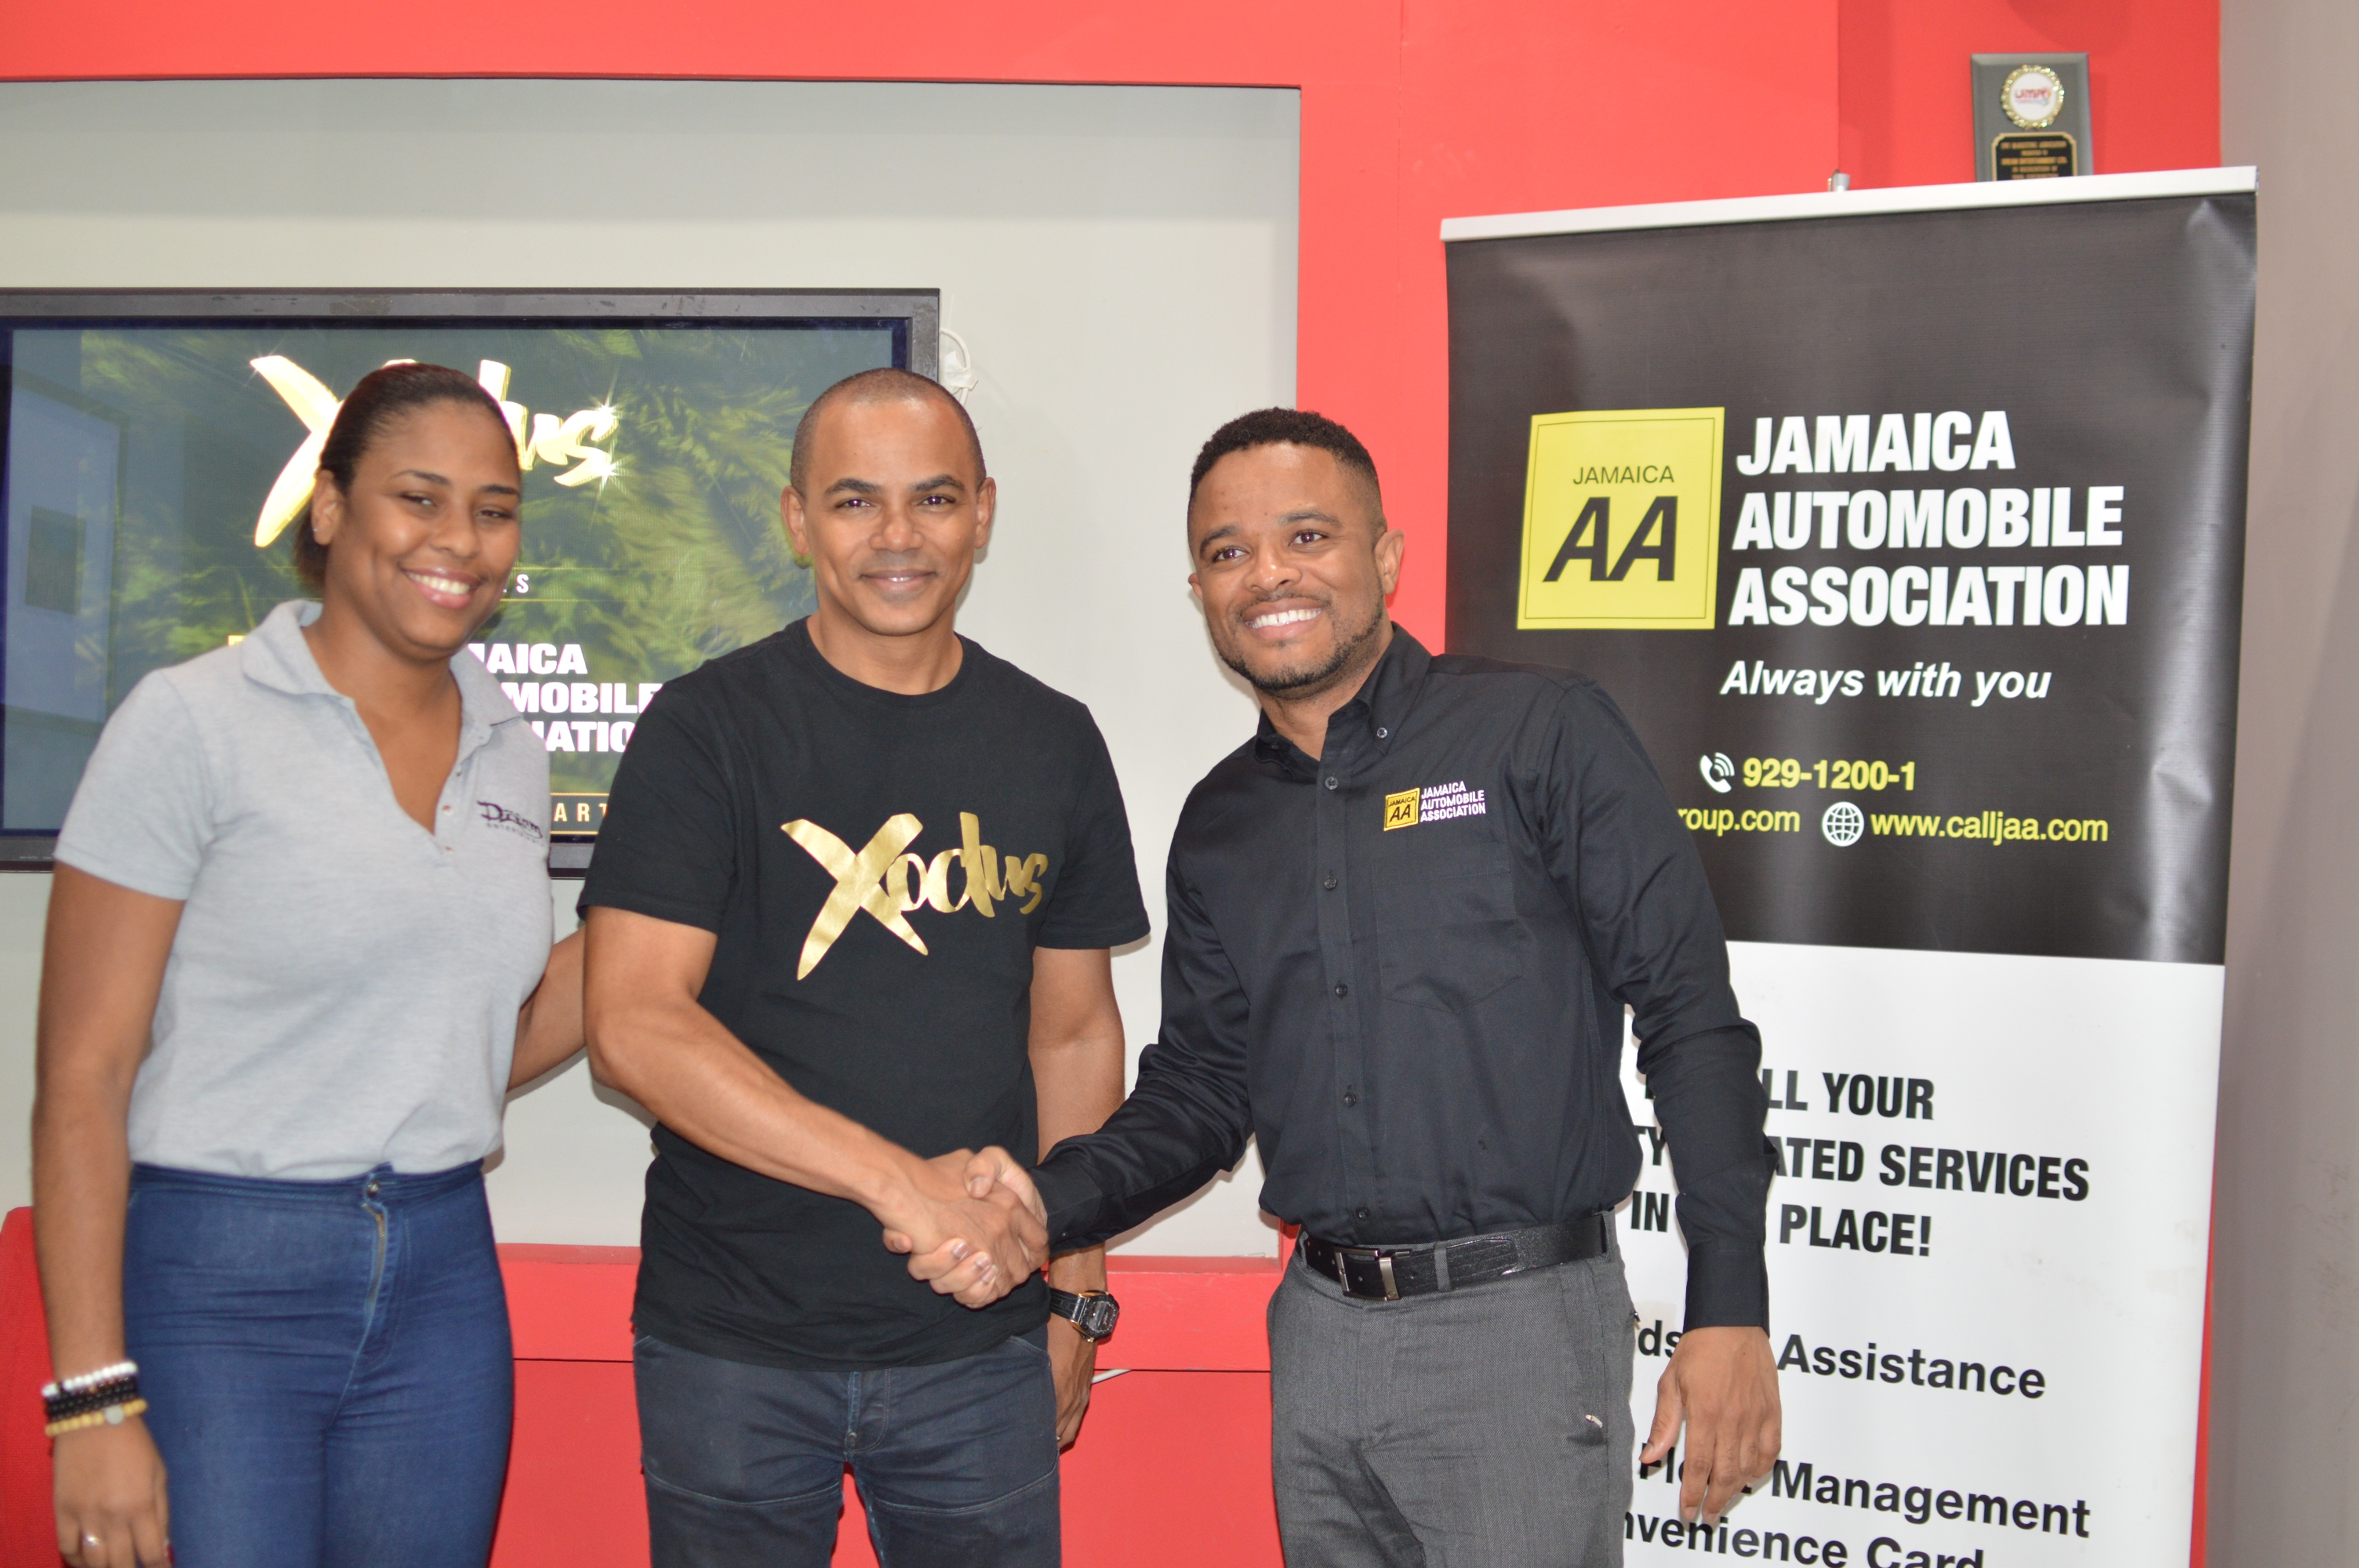 Scott Dunn (centre), managing director of Dream Entertainment, with Jason McNeish (right), deputy general manager, the Jamaica Automobile Association and Macheri Samuels, project manager, Dream Entertainment.